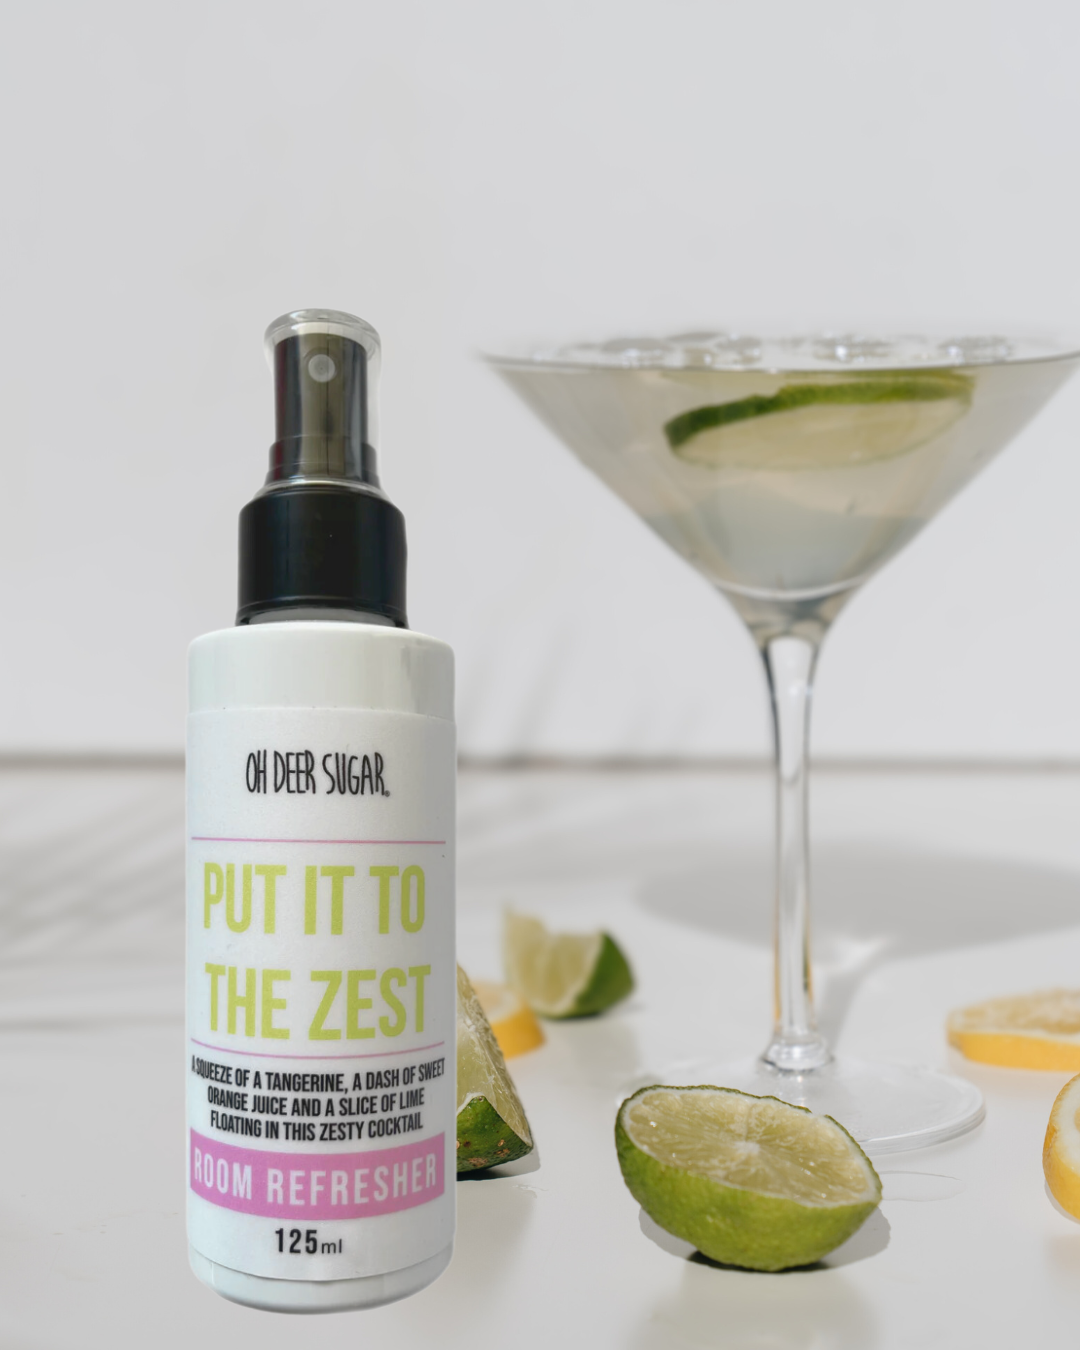 put it to the zest ROOM REFRESHER 125ml